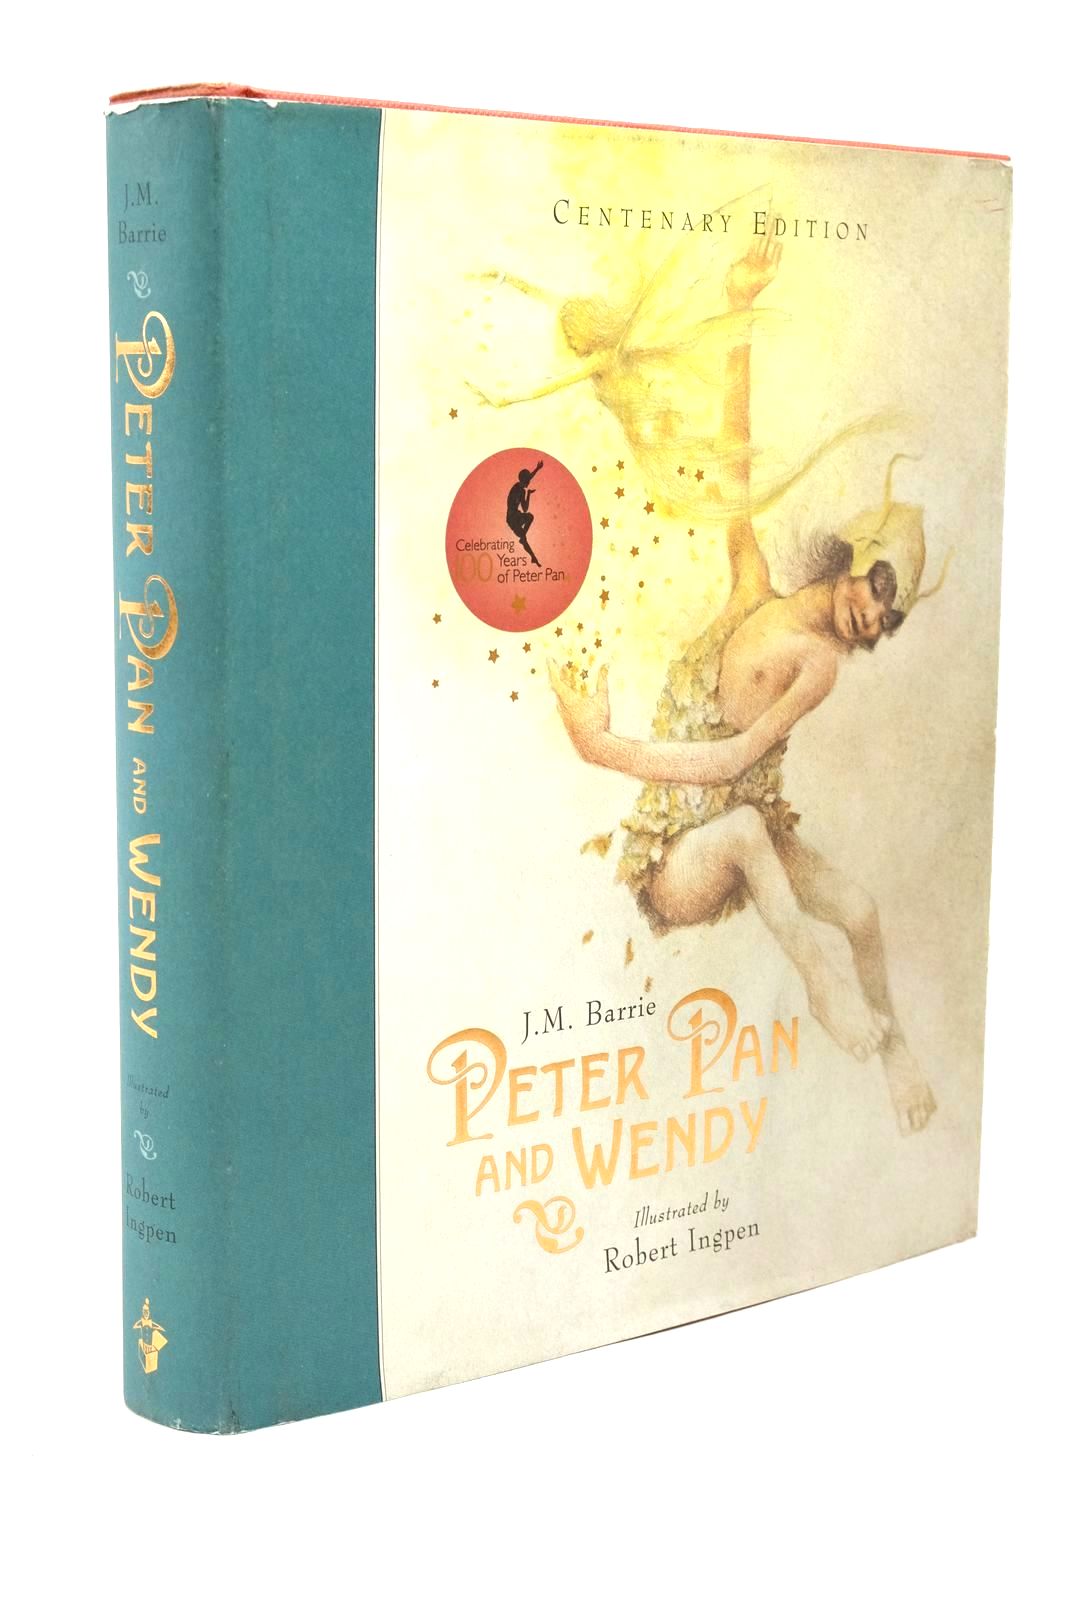 Photo of PETER PAN AND WENDY written by Barrie, J.M. illustrated by Ingpen, Robert published by Templar Publishing (STOCK CODE: 1322751)  for sale by Stella & Rose's Books